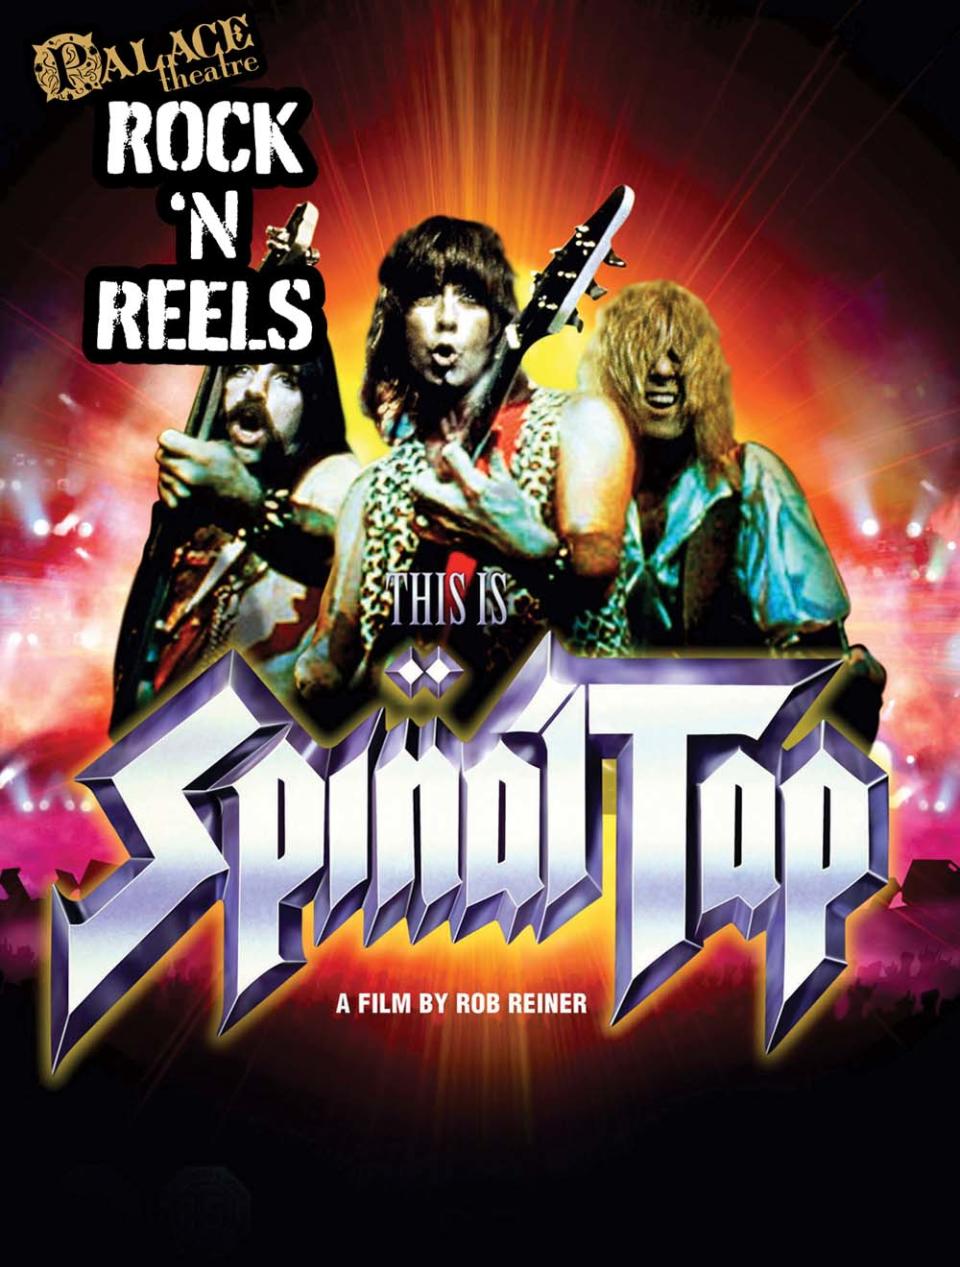 "This is Spinal Tap" will be shown Friday at the Canton Palace Theatre. Tickets cost $10.